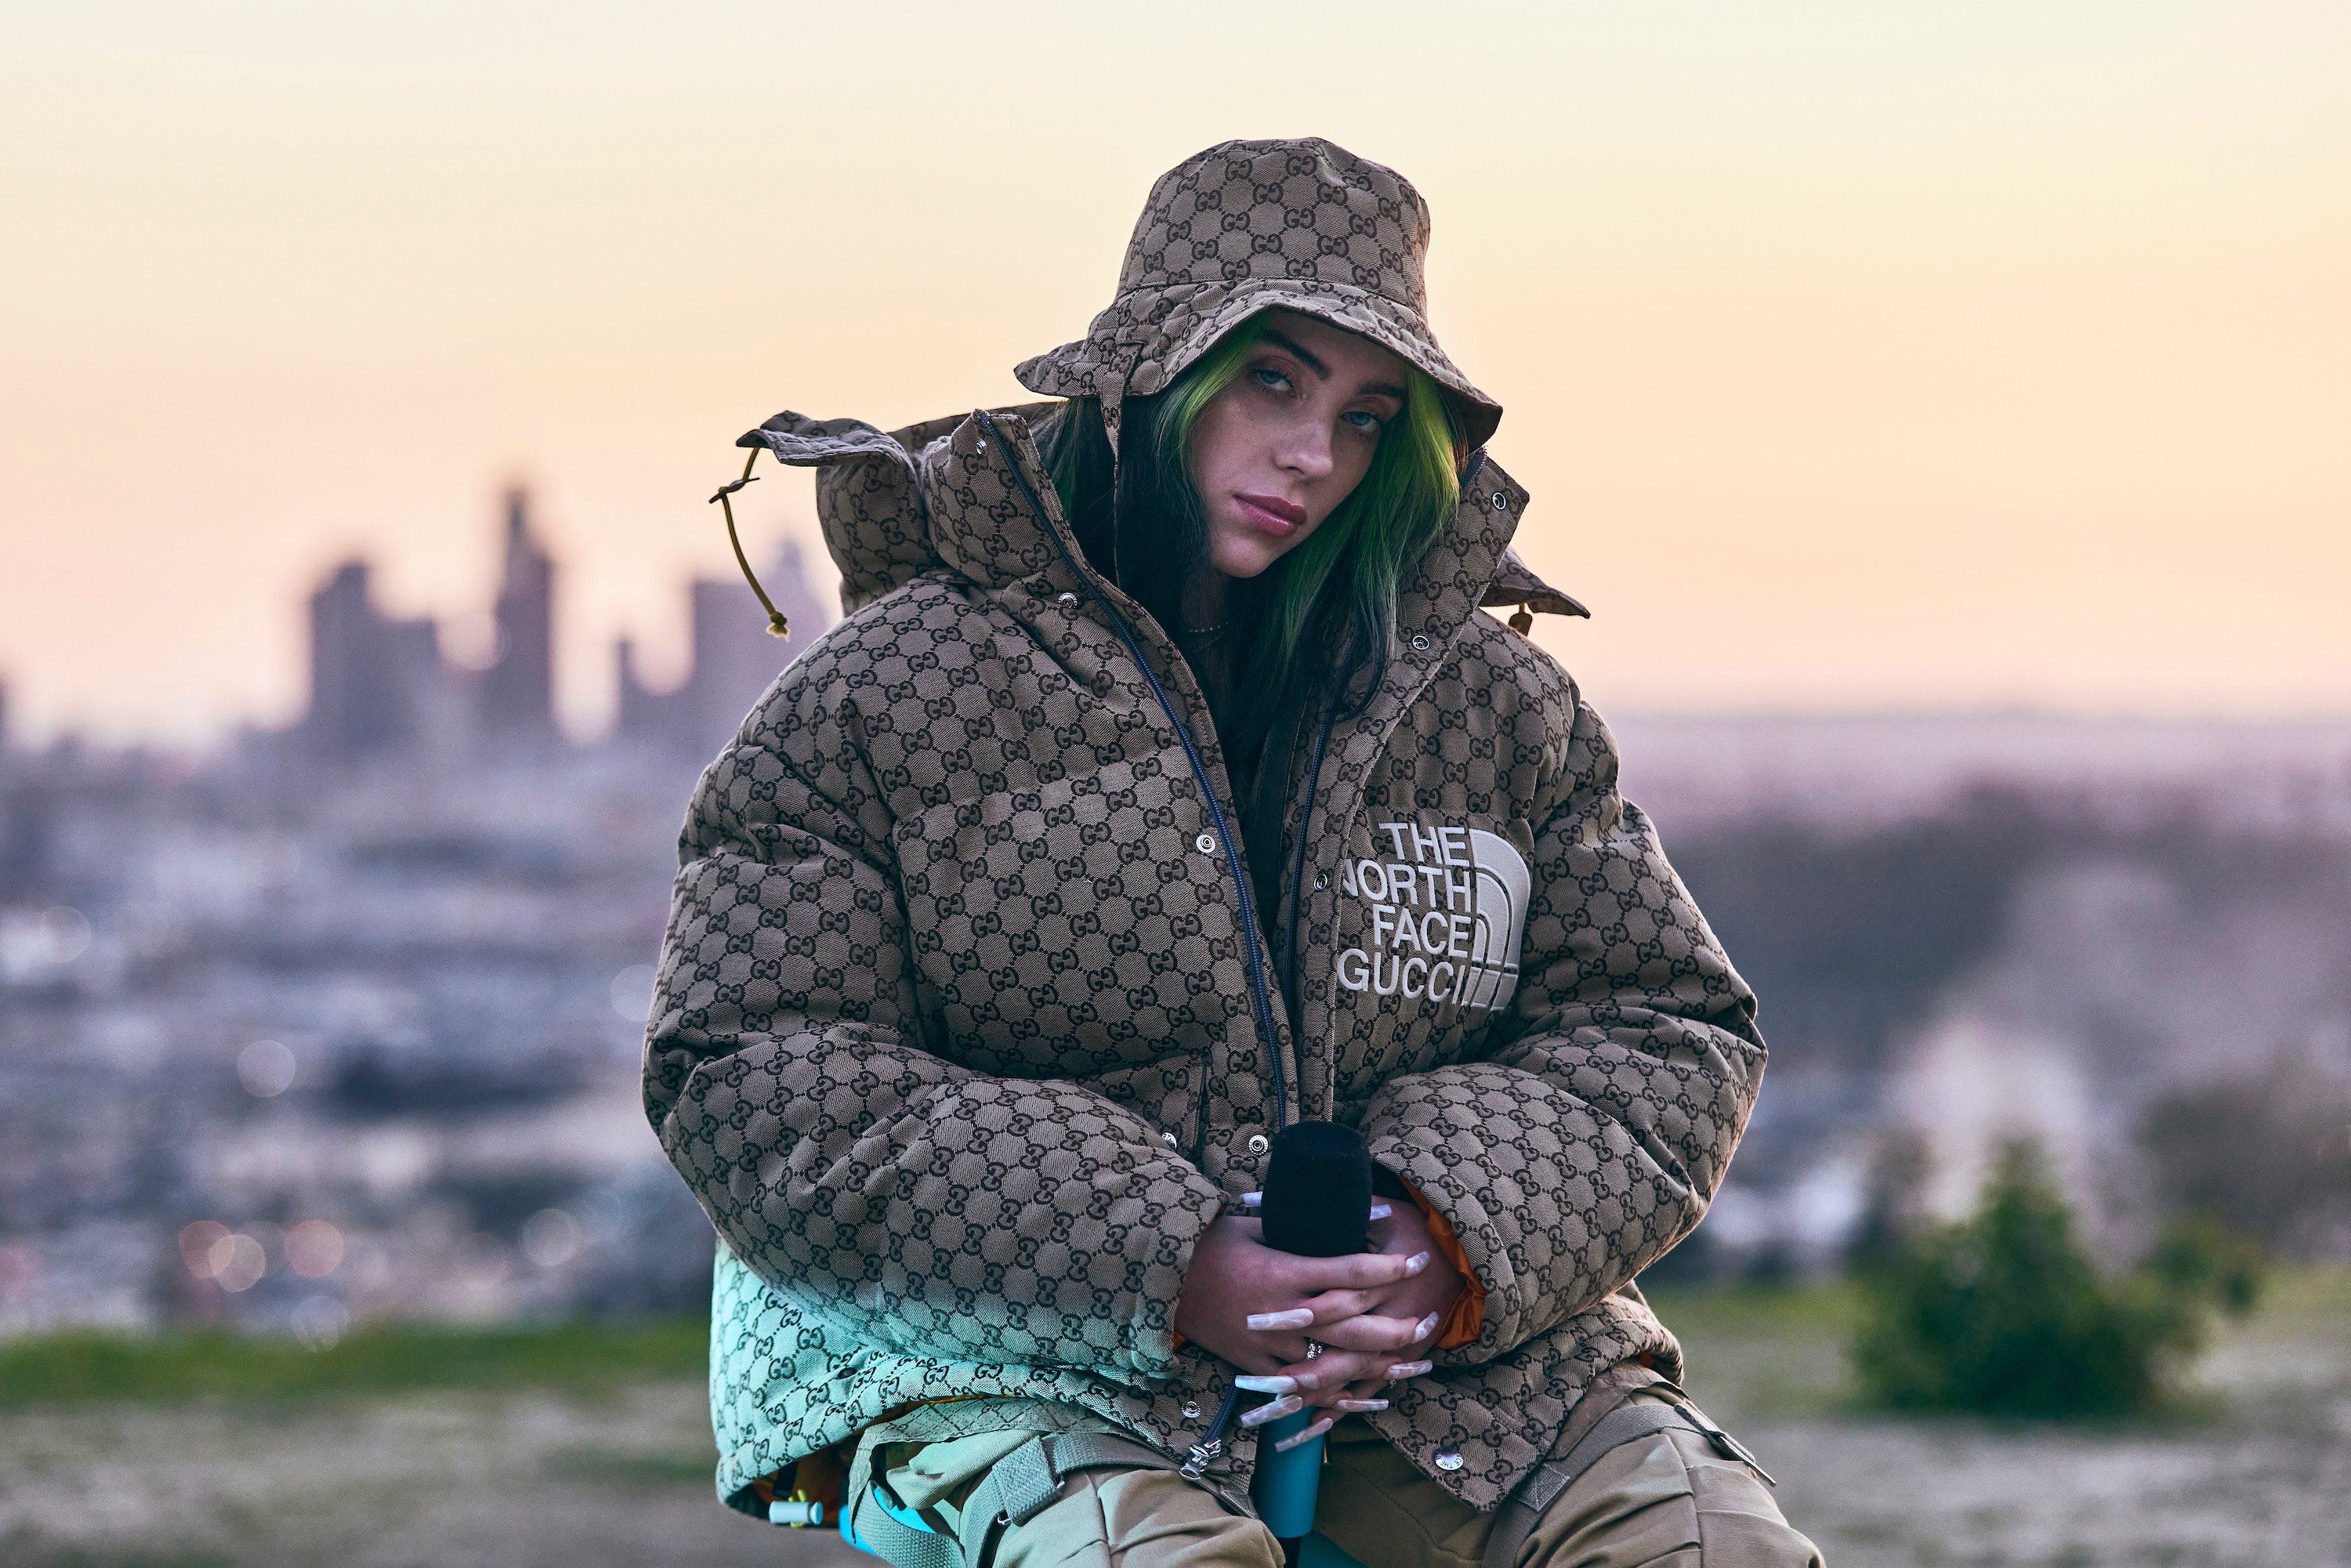 Oscars 2022: Would ‘No Time to Die’ Be Billie Eilish’s First Academy Award Win?